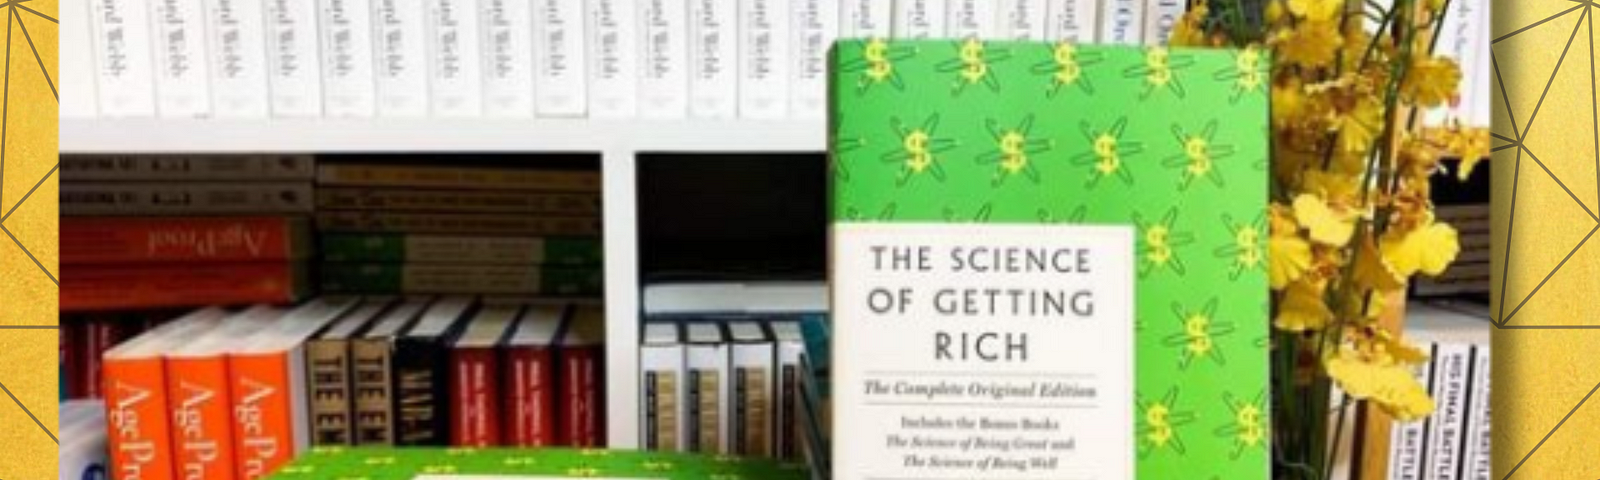 10 LESSONS FROM “THE SCIENCE OF GETTING RICH” BY WALLACE D. WATTLES